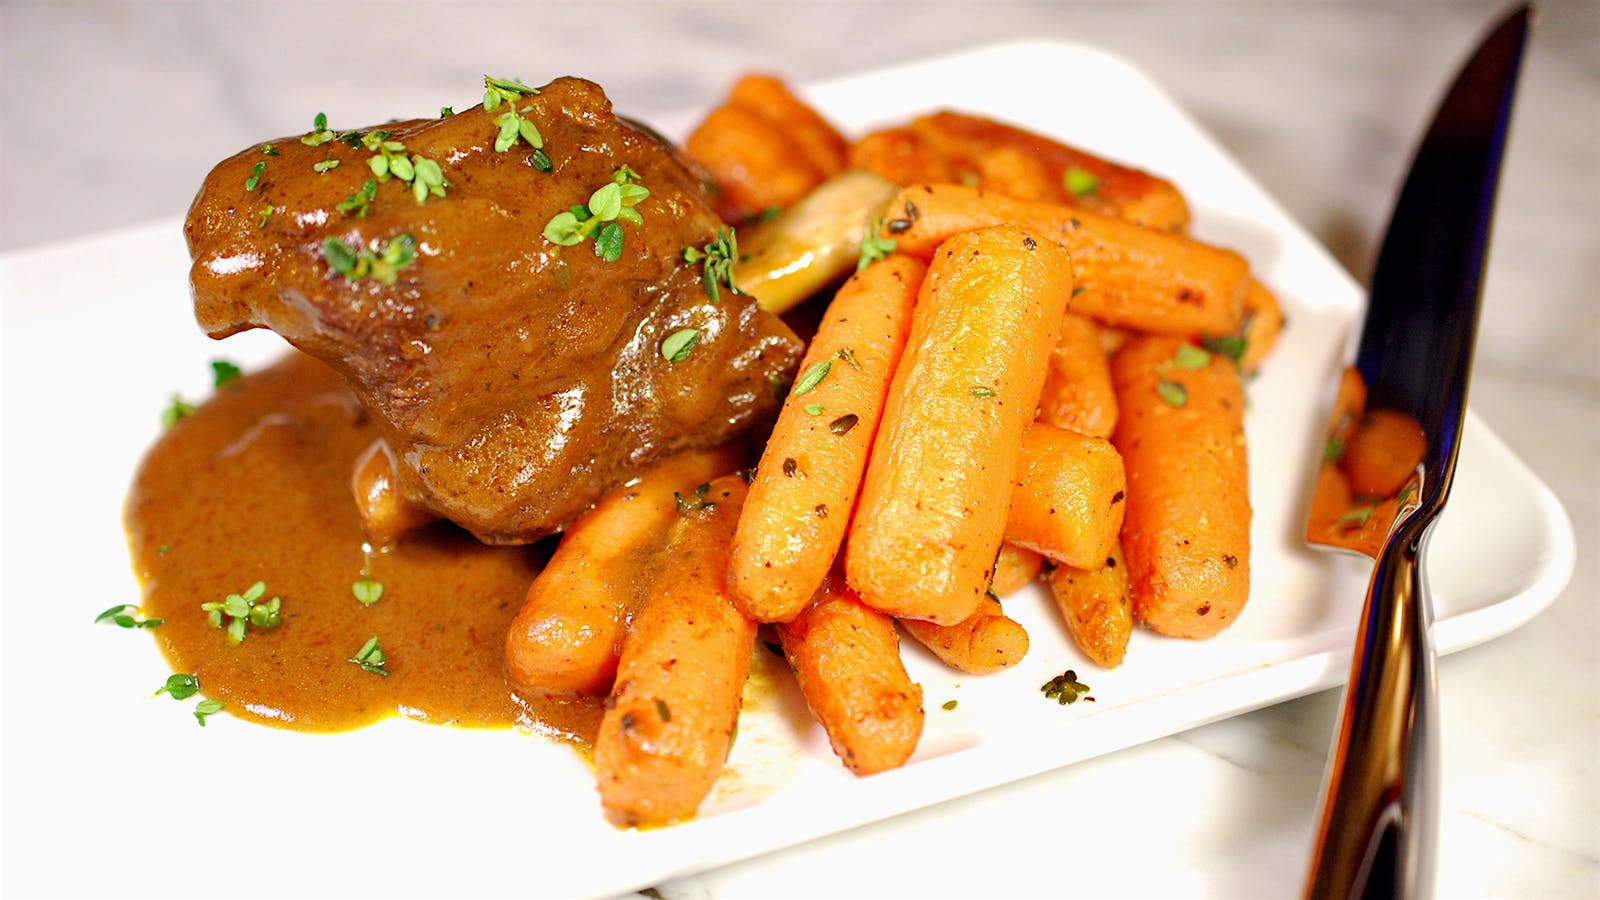 8 & $20: Easy Braised Short Ribs and Roasted Carrots